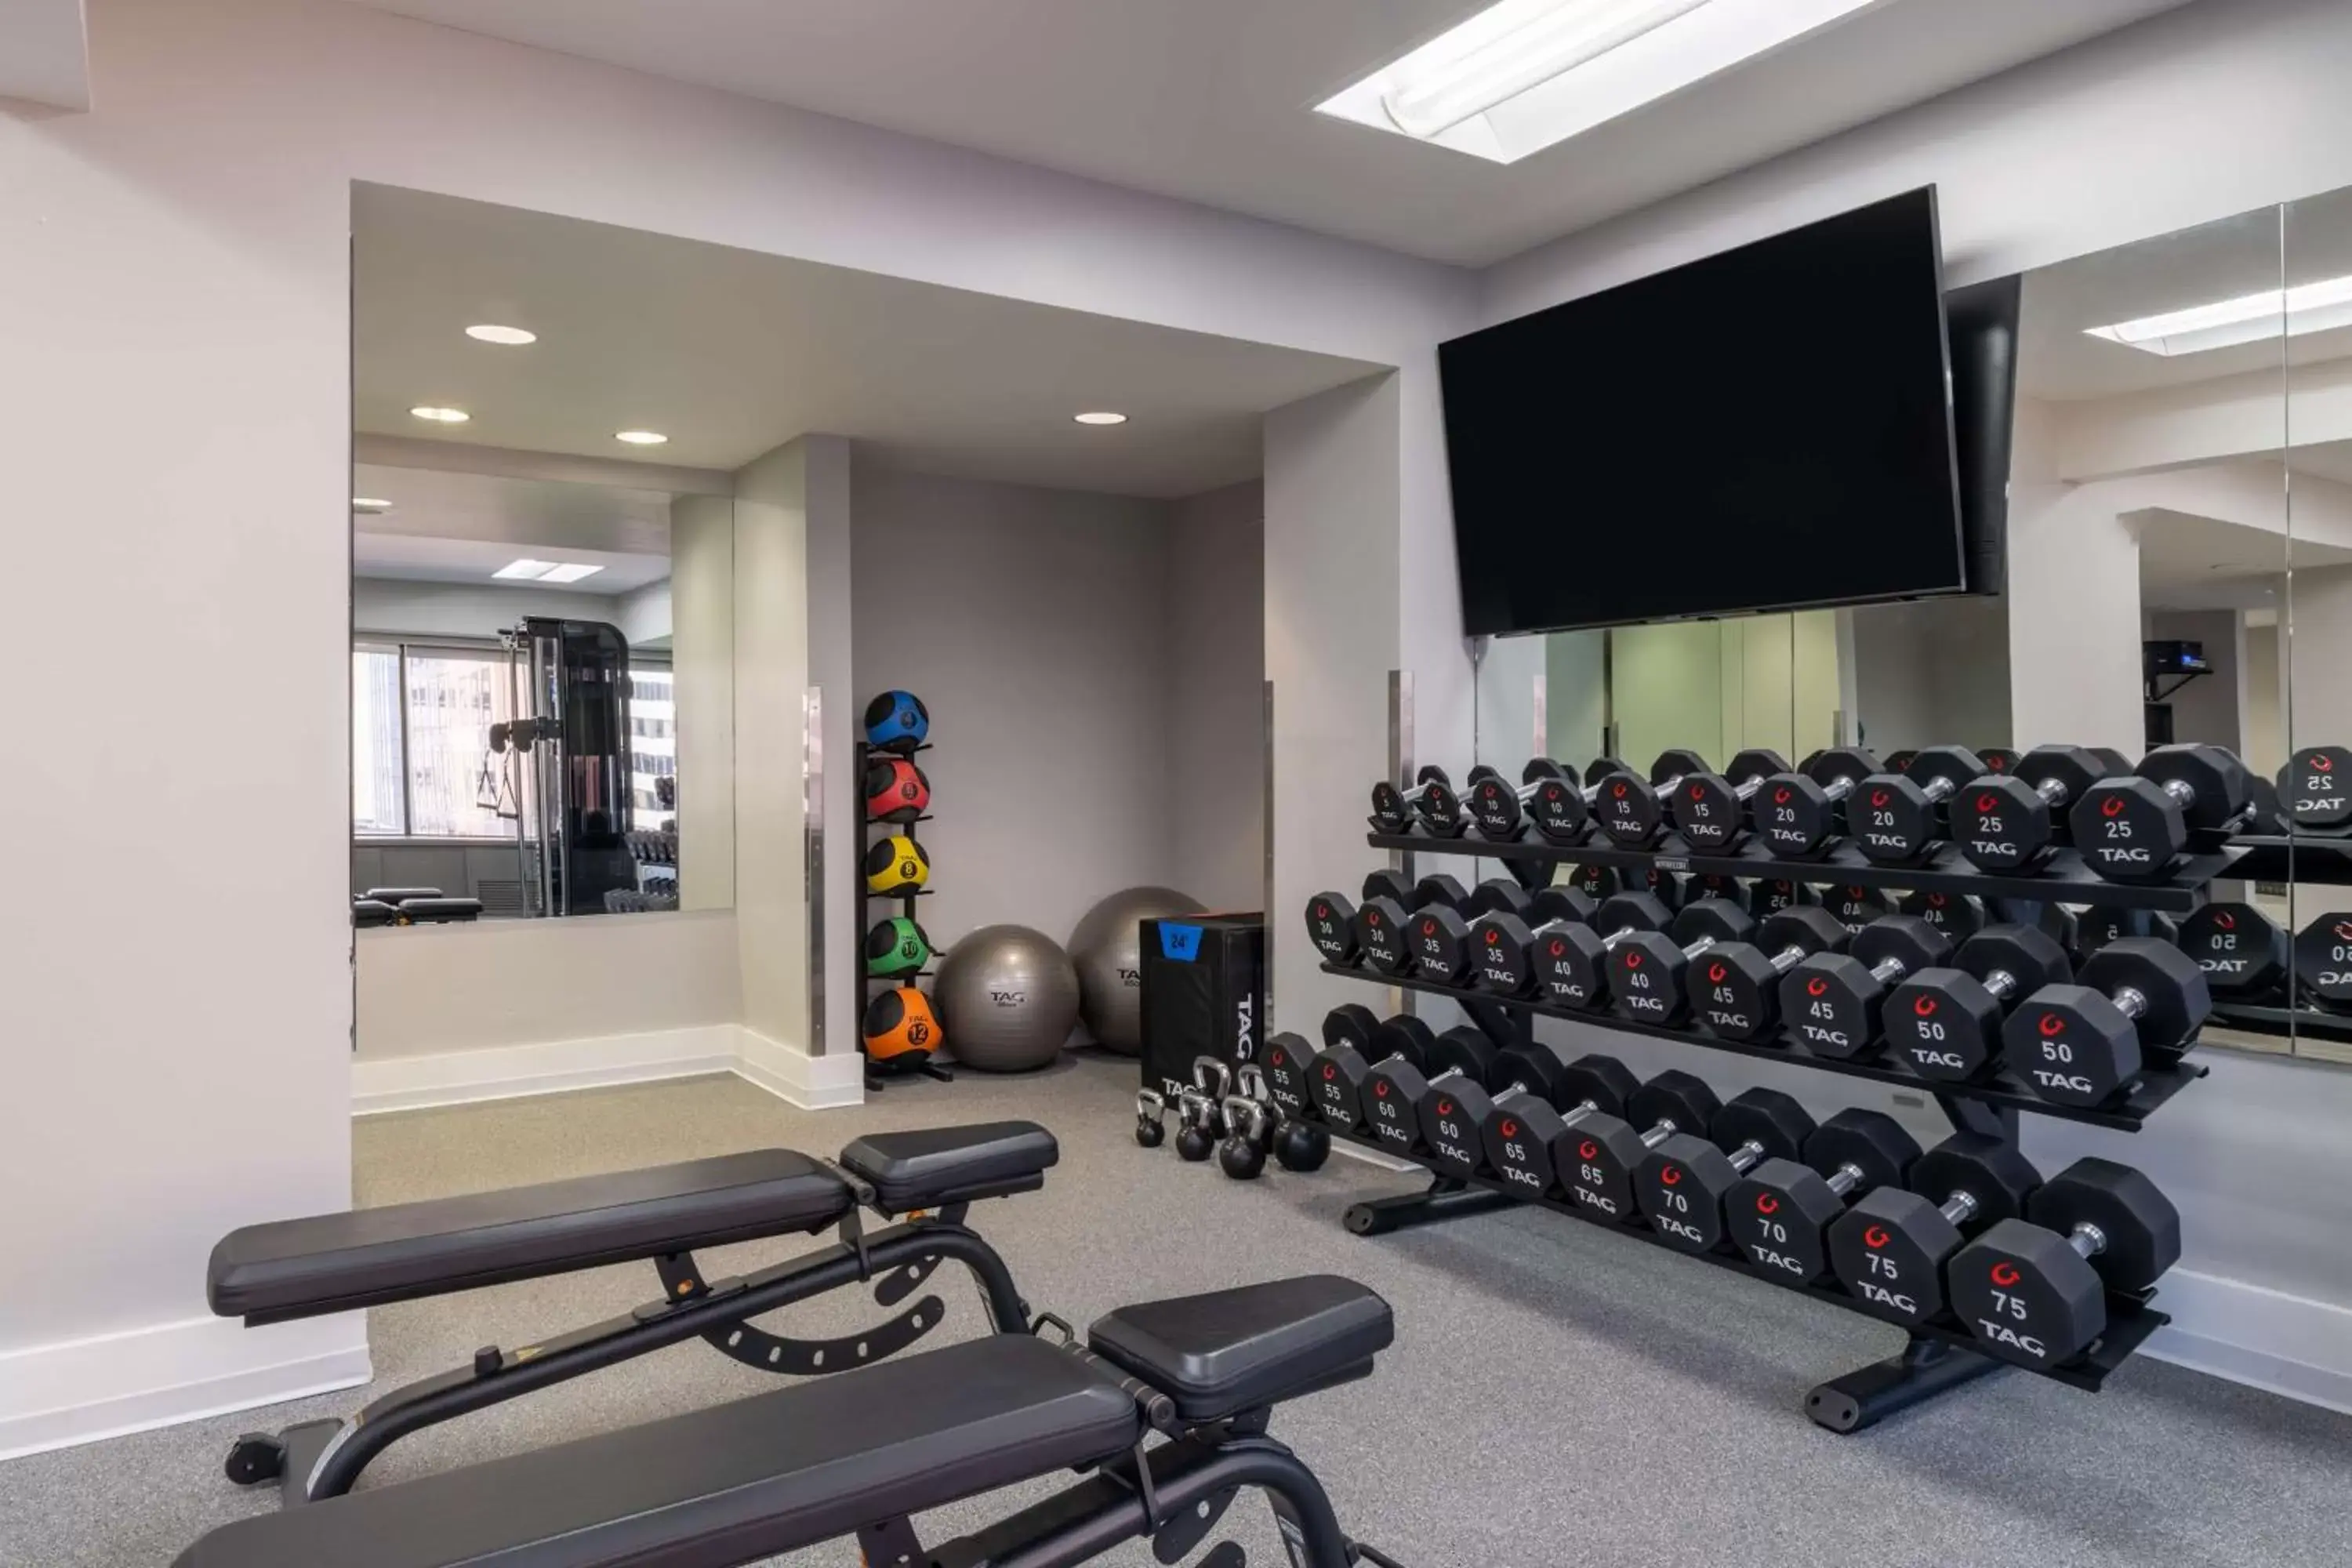 Fitness centre/facilities, Fitness Center/Facilities in Hilton San Francisco Financial District